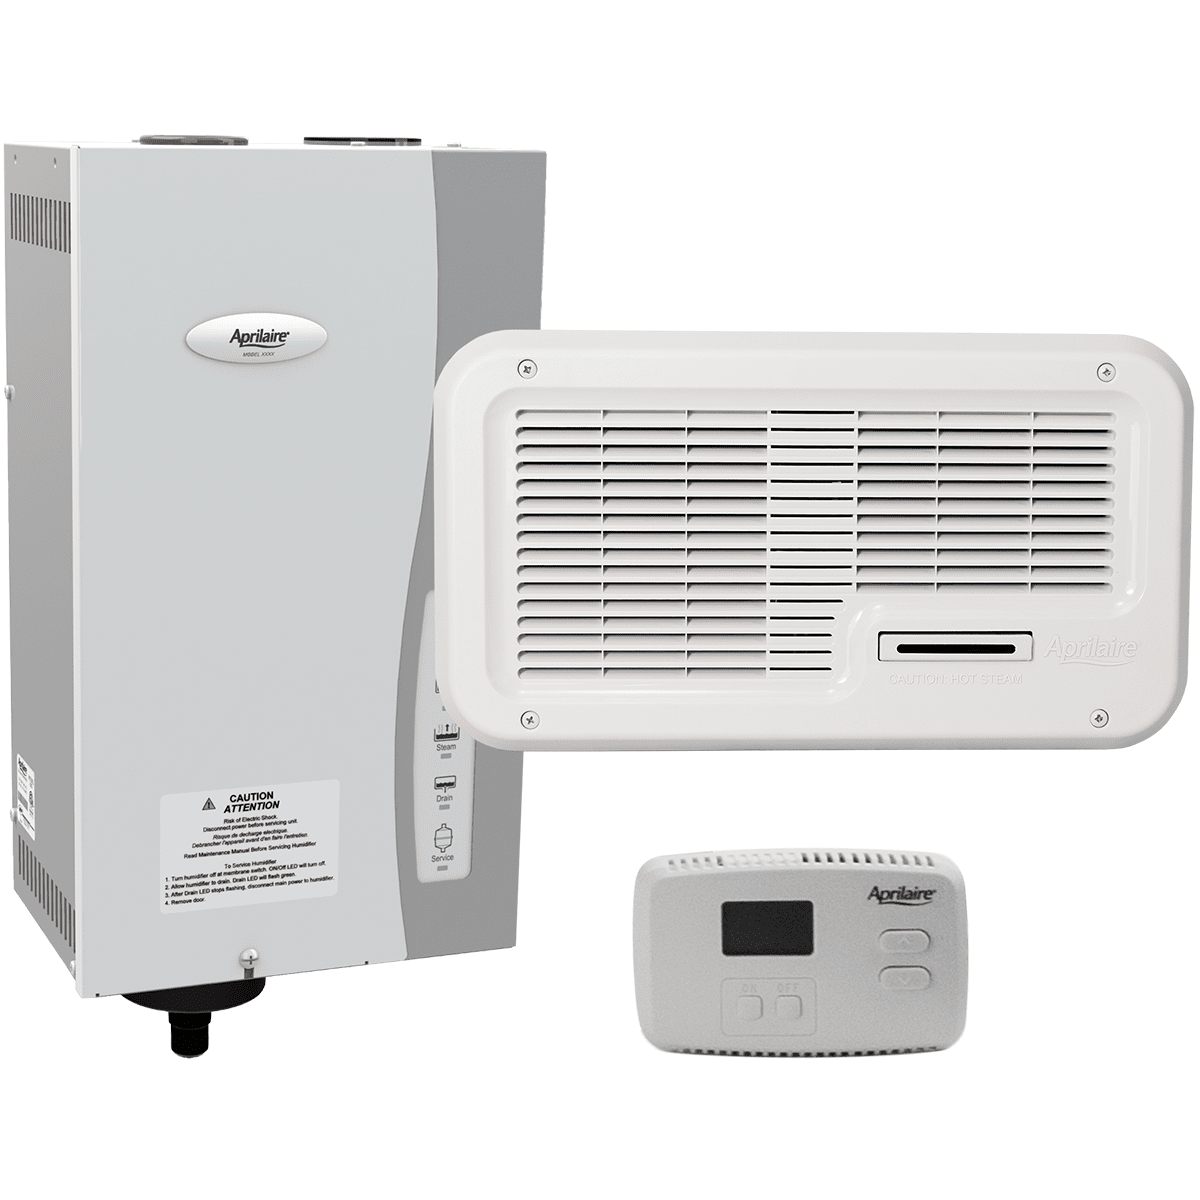 Aprilaire Model 865 Ductless Steam Humidifier Package